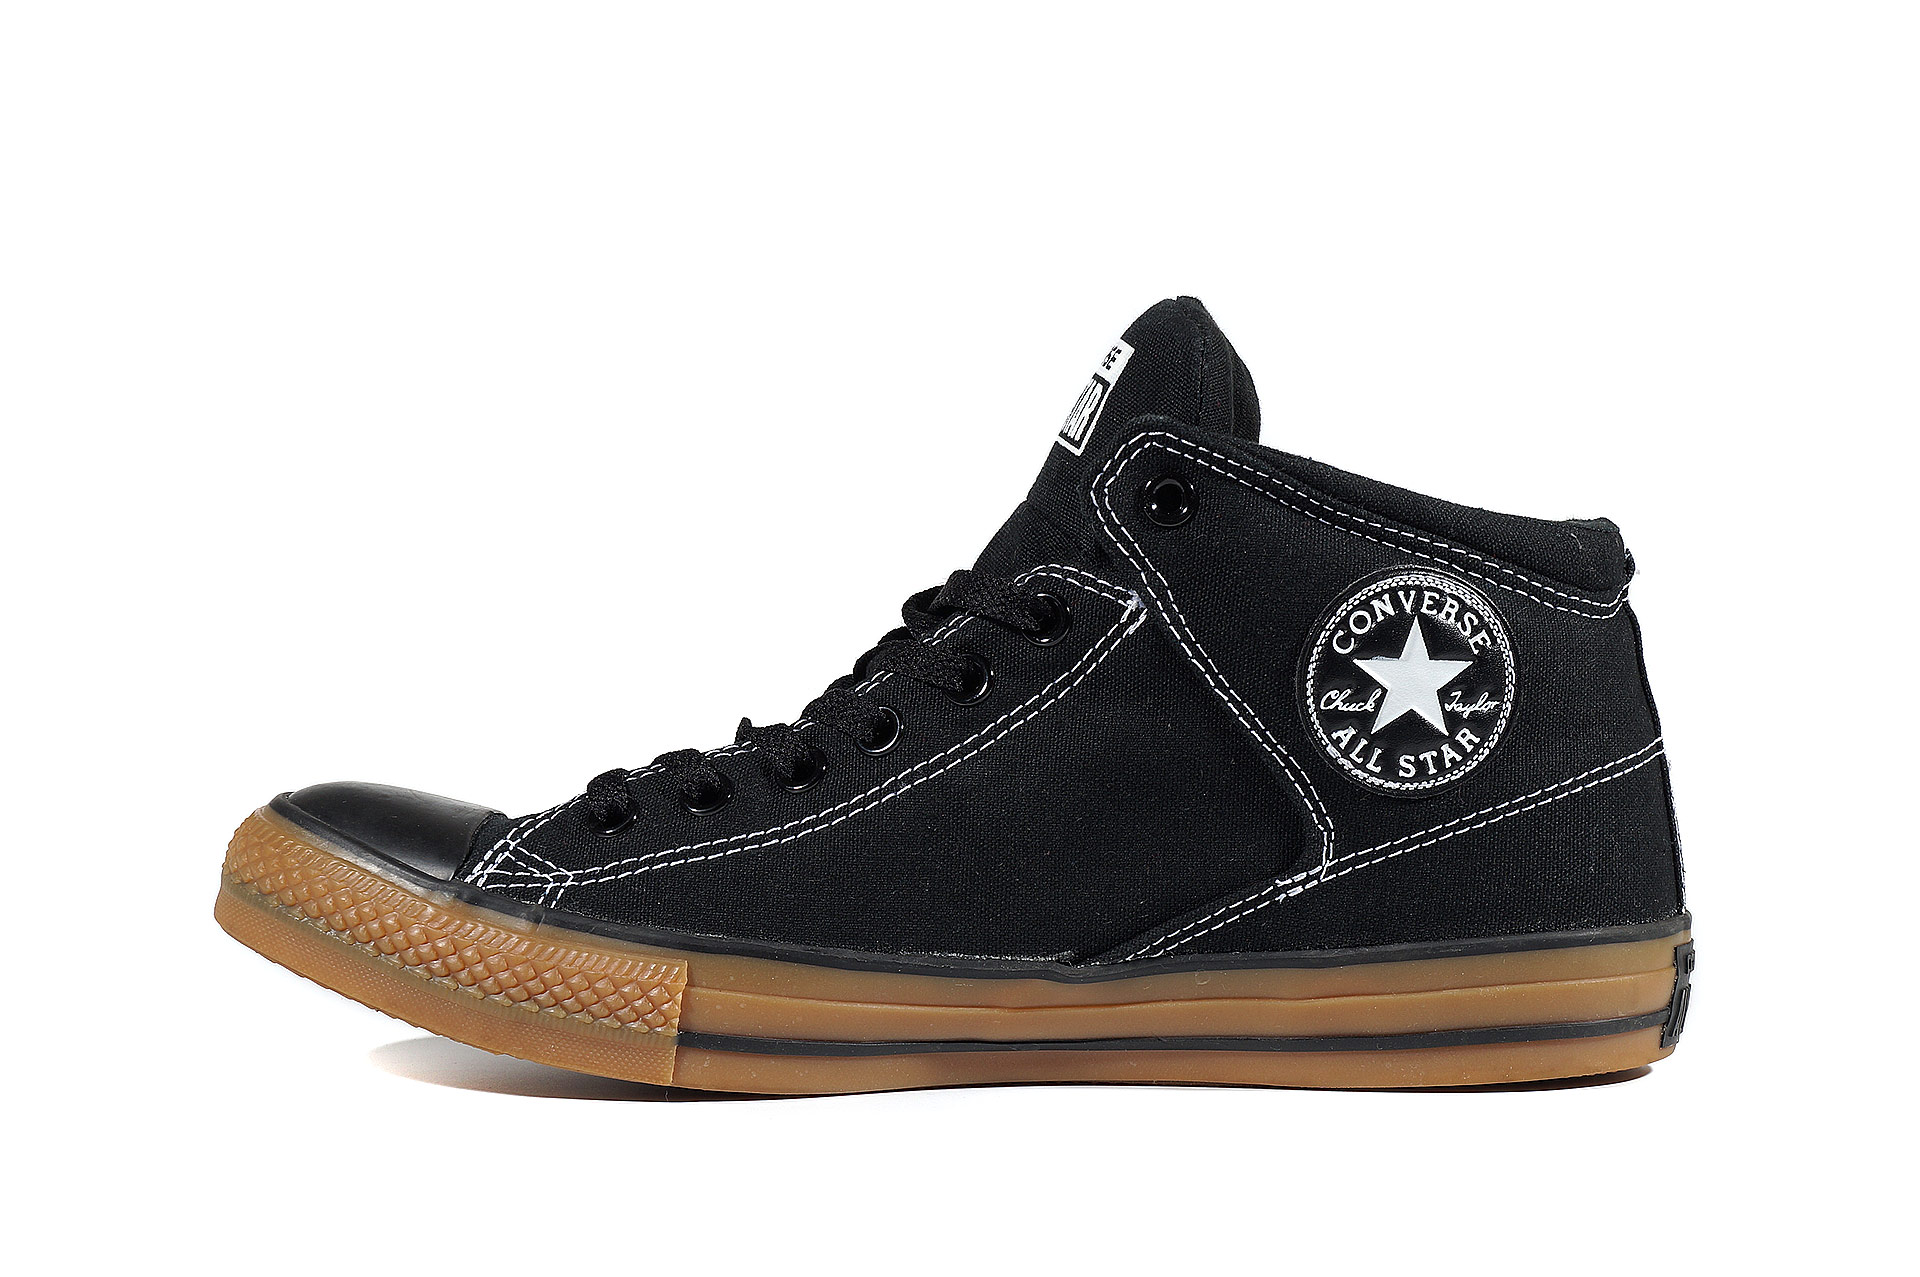 men's converse chuck taylor all star street mid sneakers